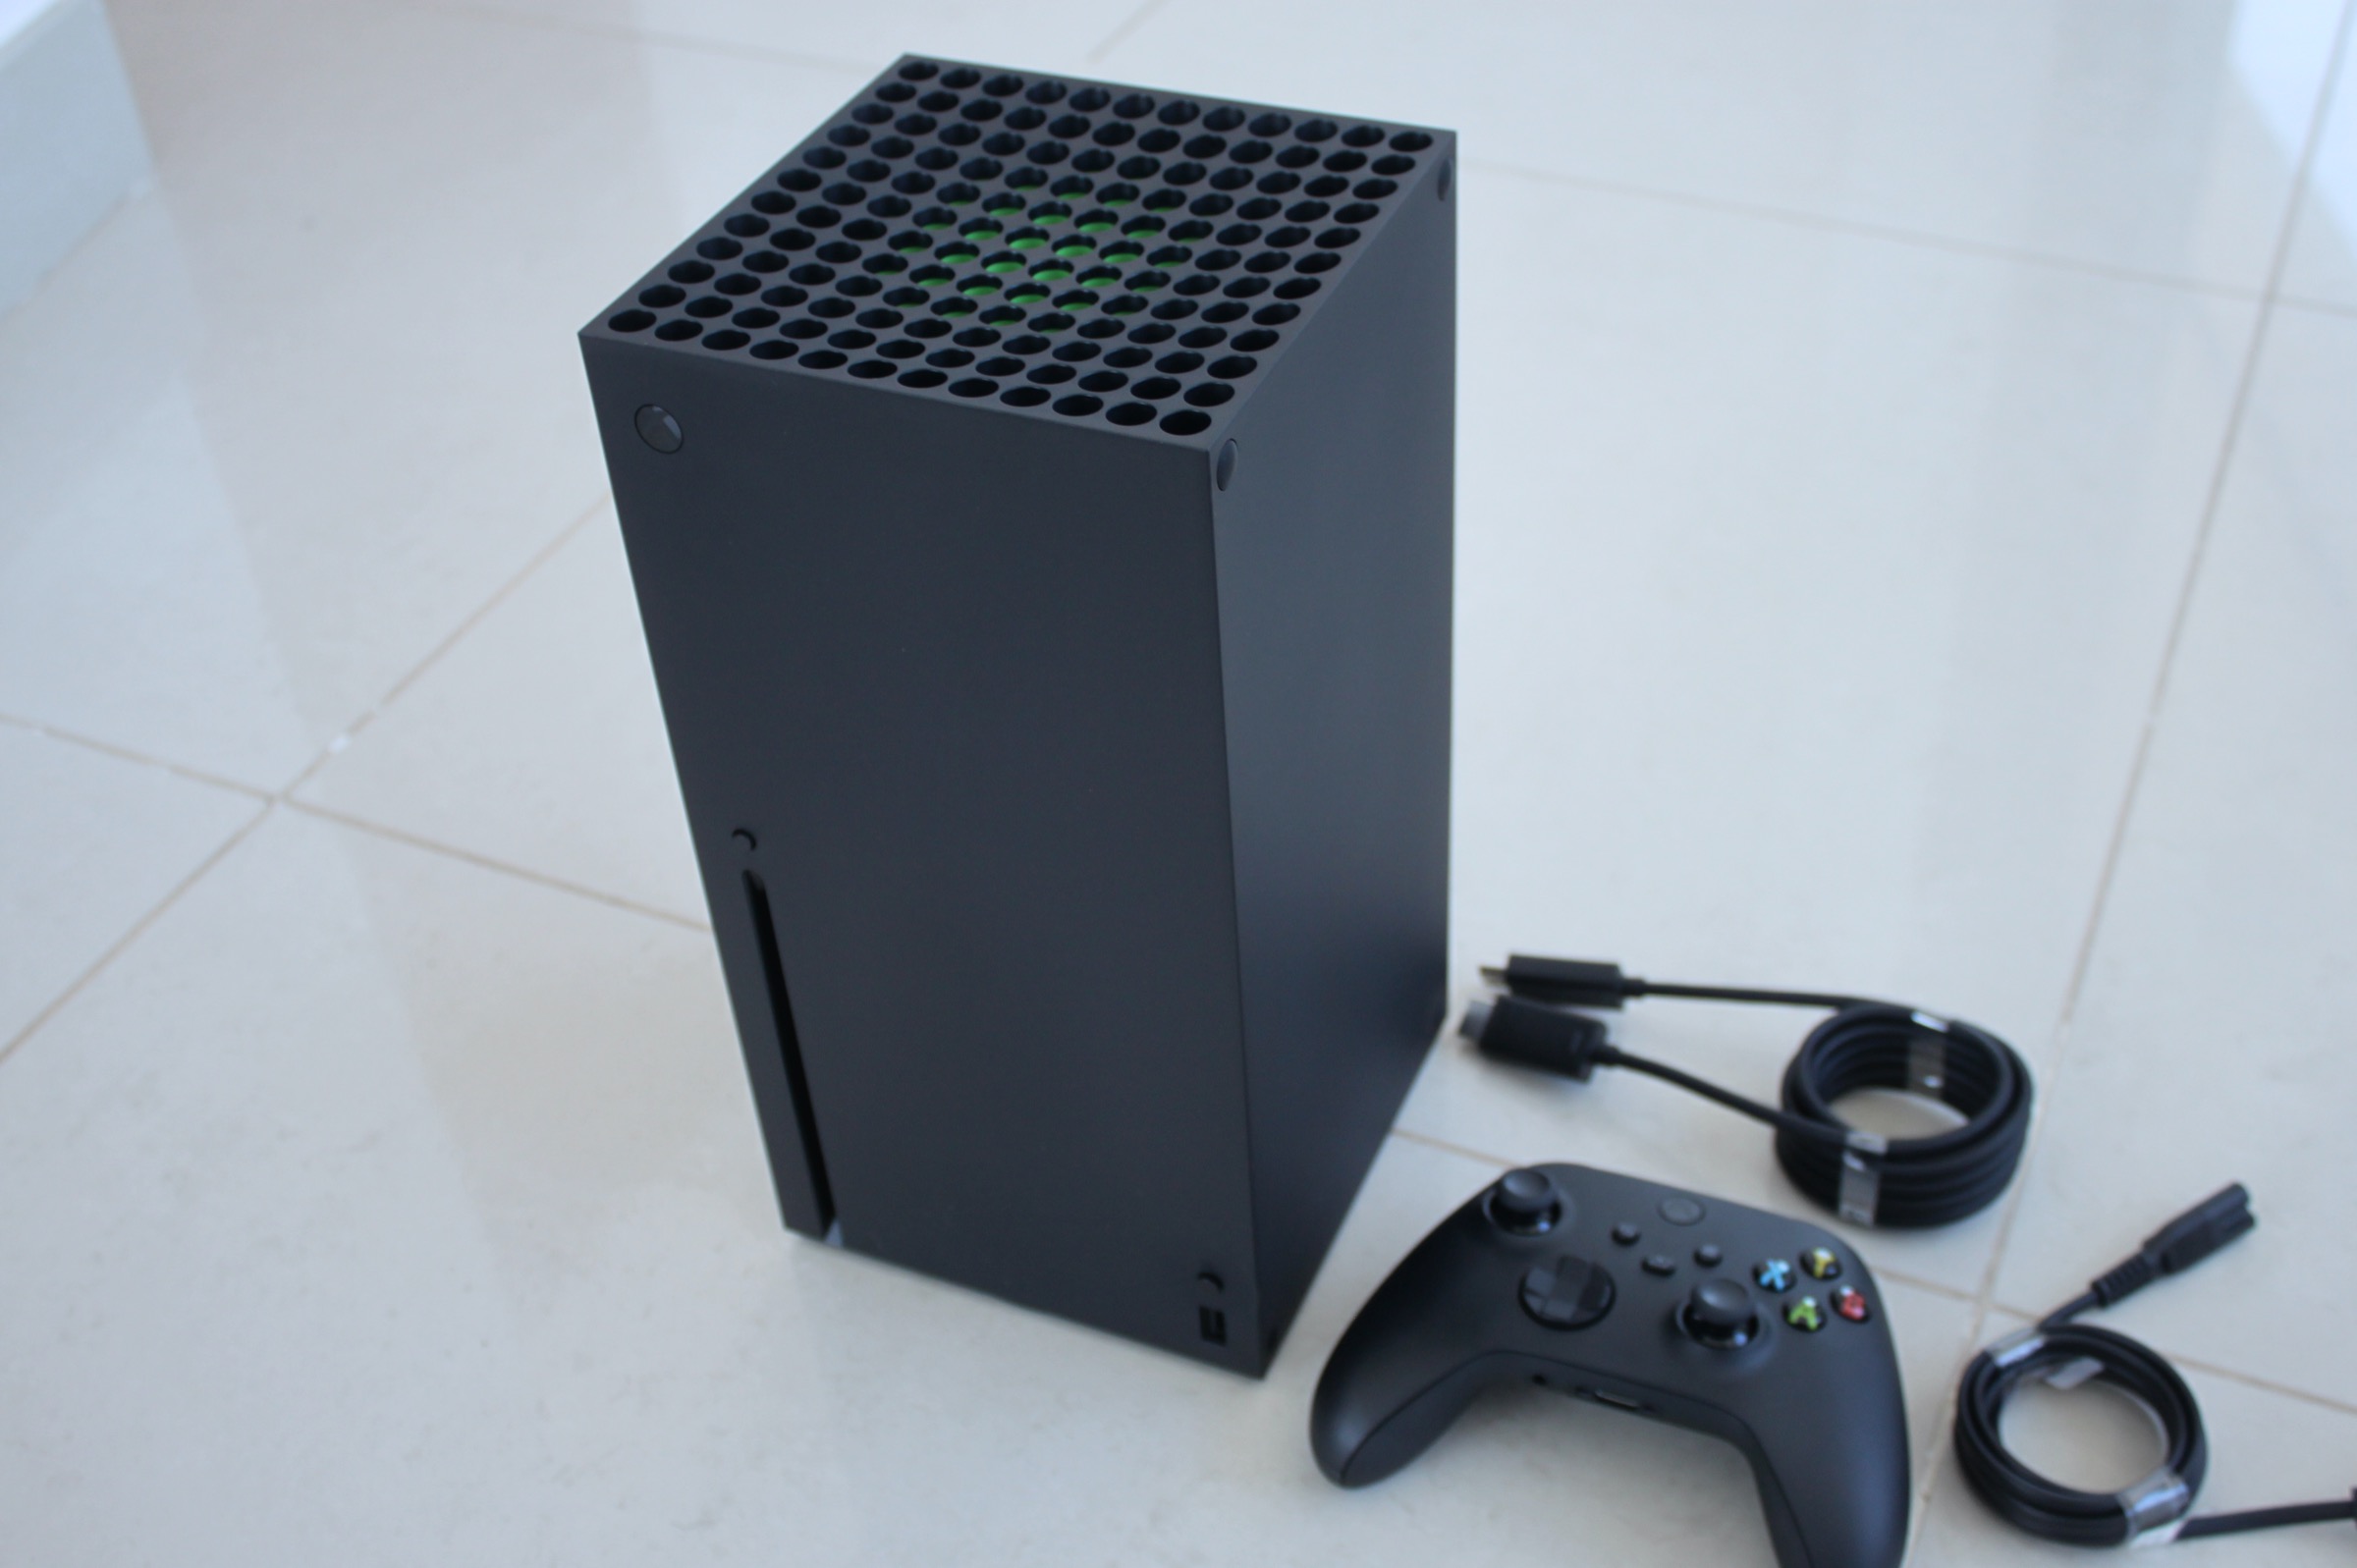 Next-generation game machine 'Xbox Series X' that can output 4K HDR video  at 120Hz Play review, high quietness and simple and light UI are attractive  - GIGAZINE